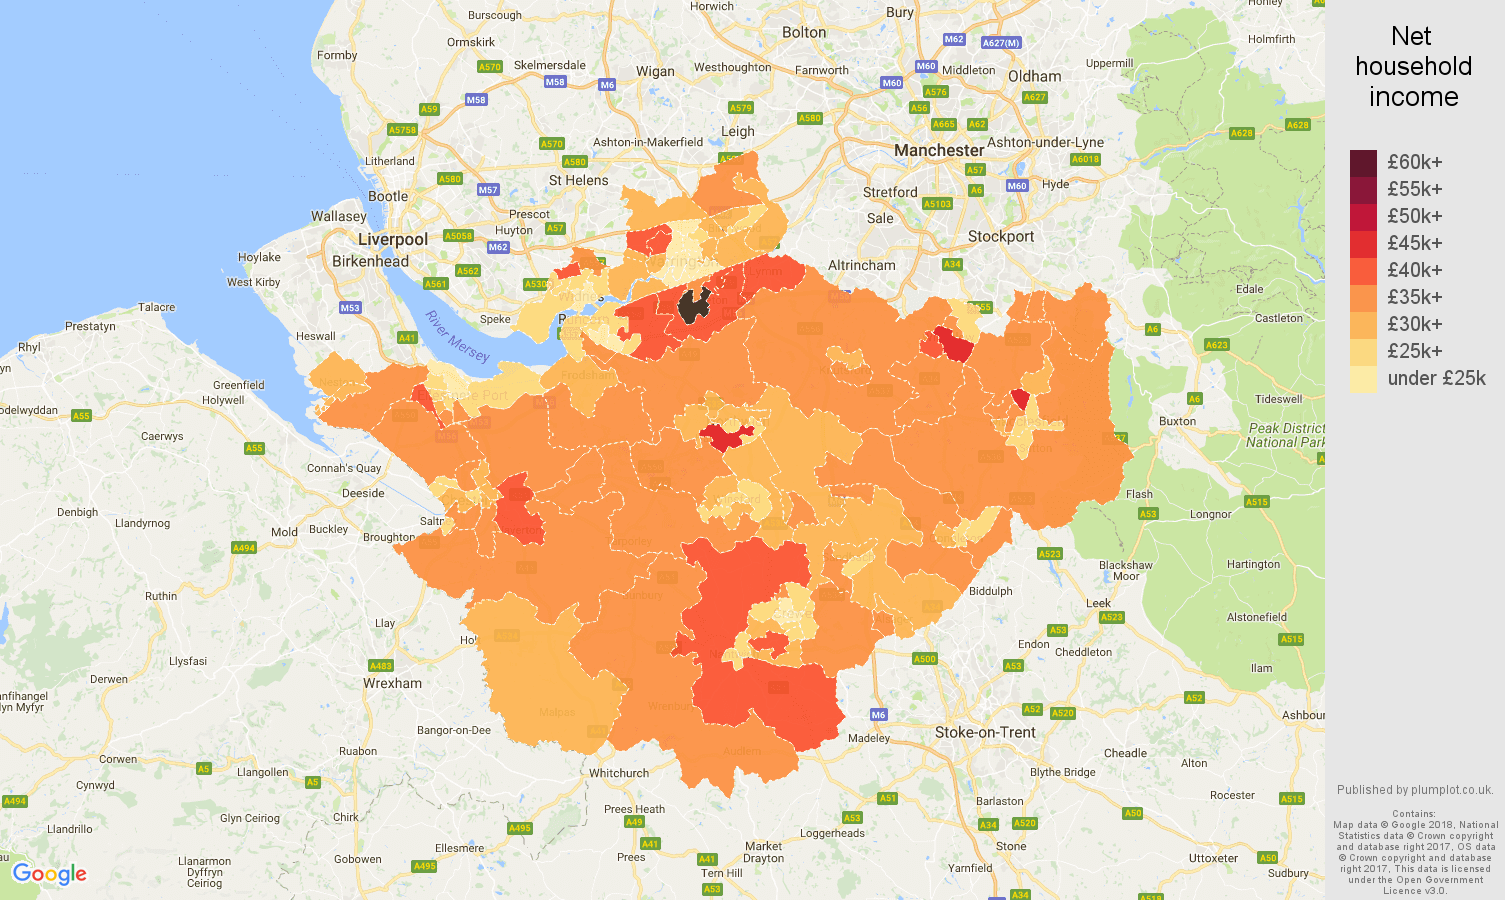 Cheshire net household income map